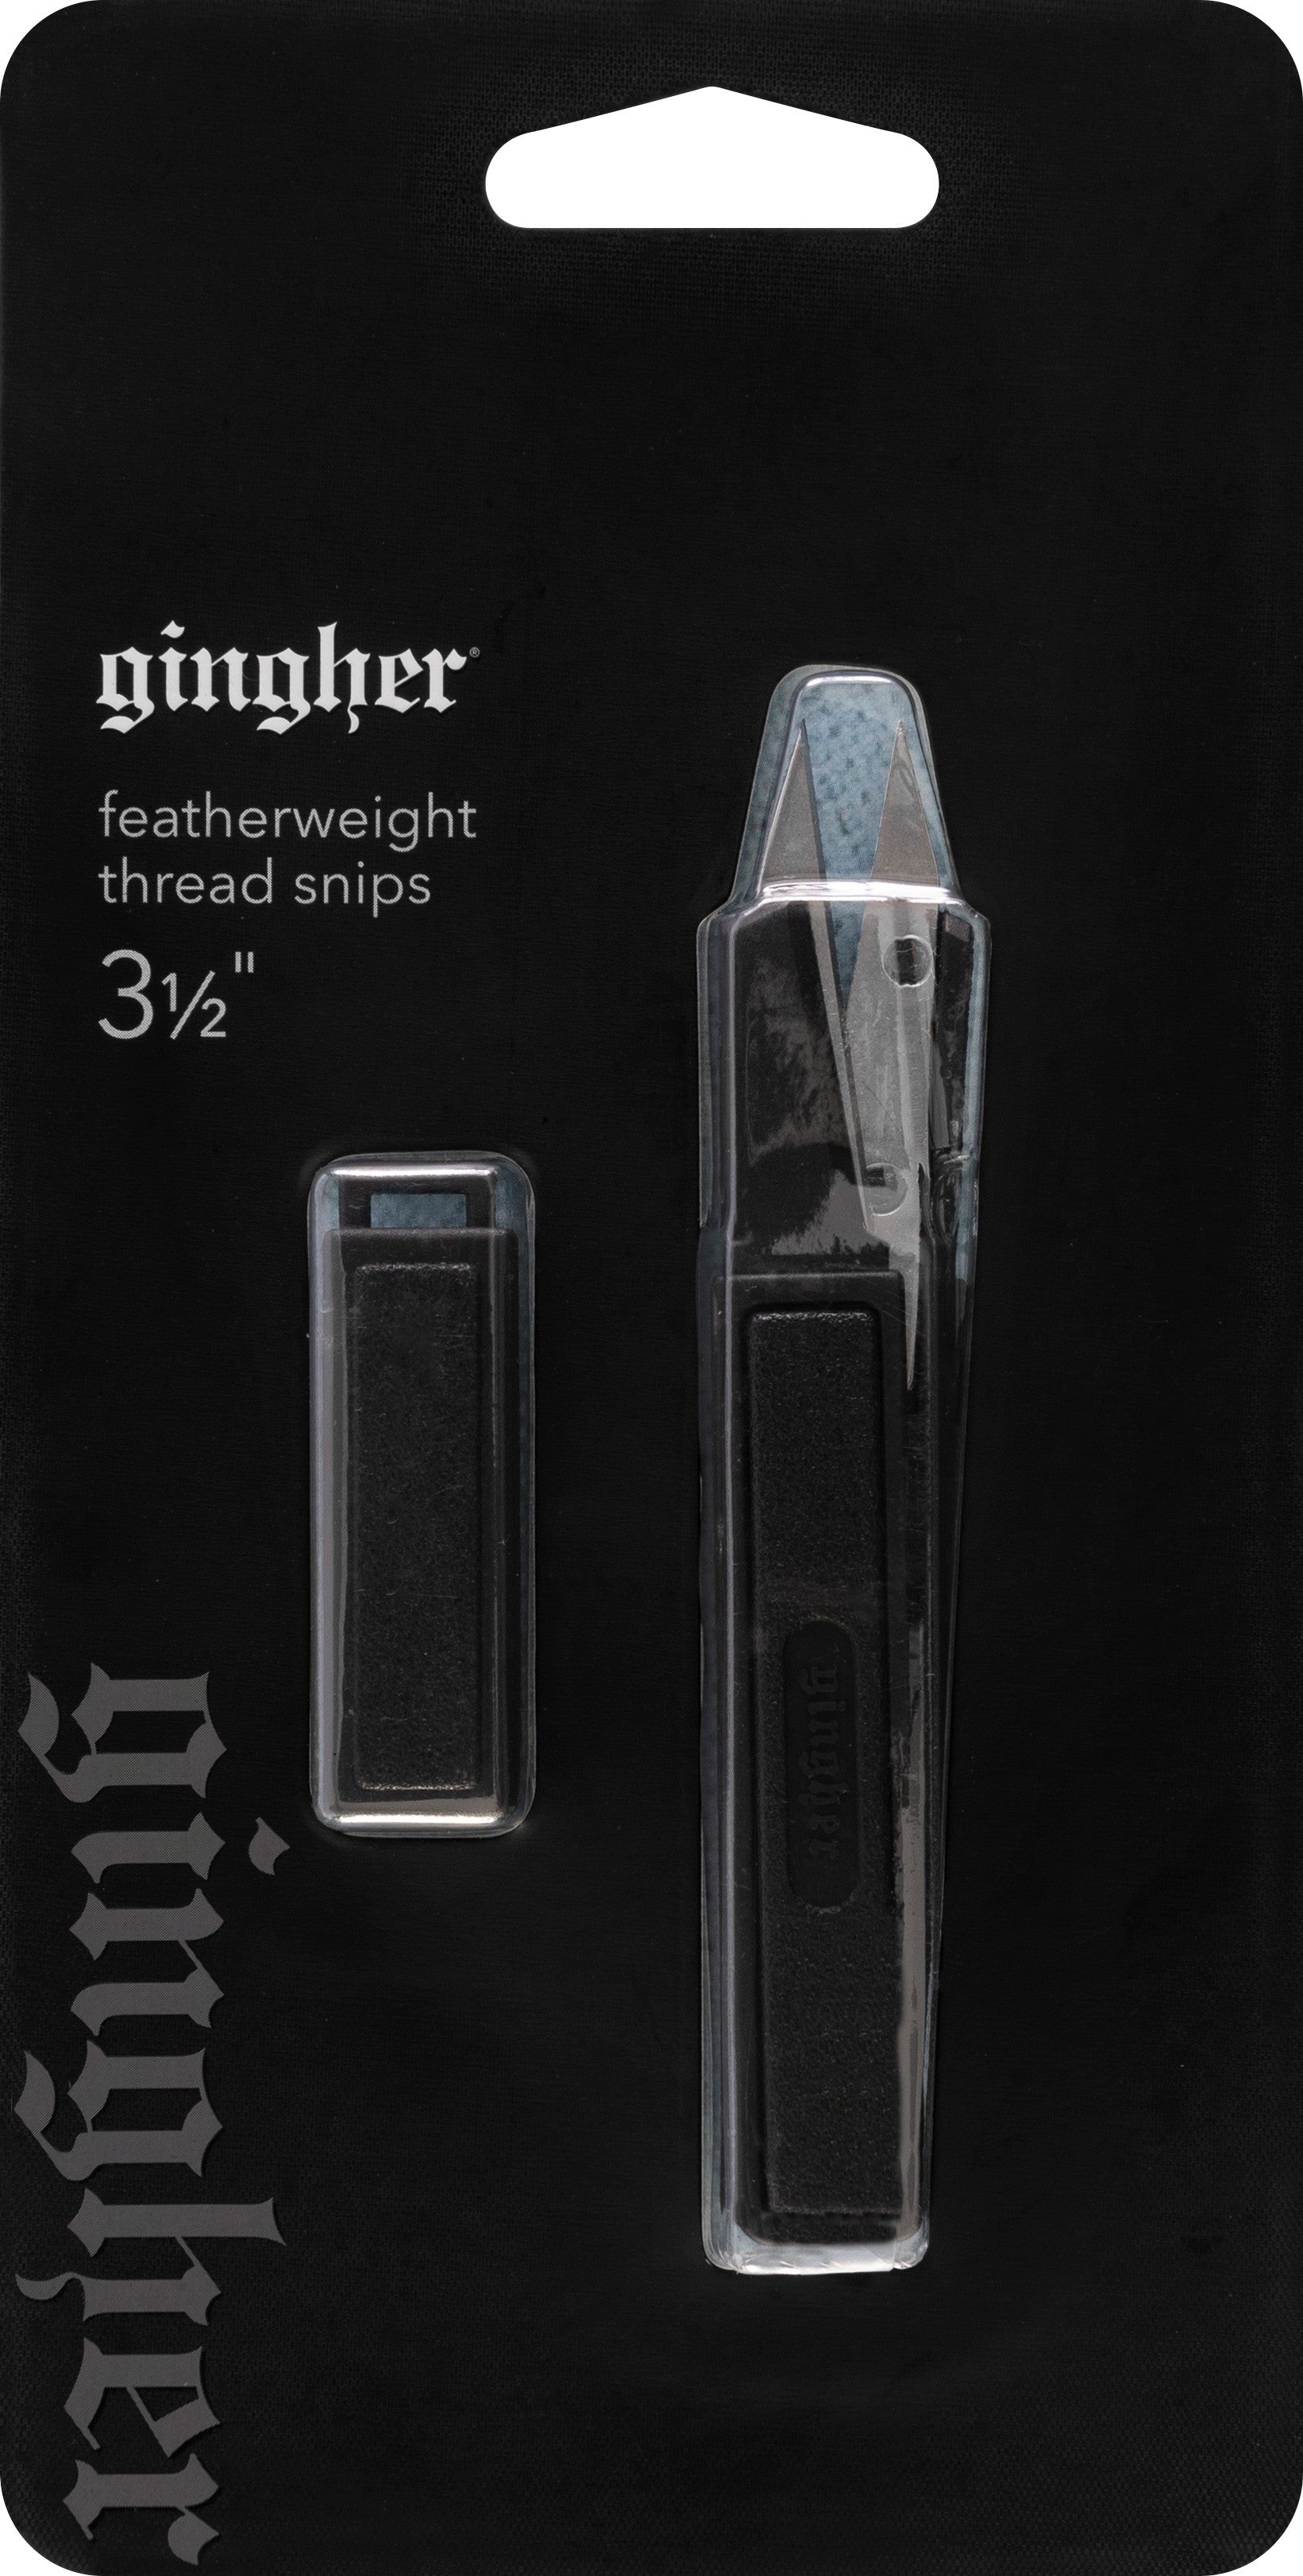 Gingher - Featherweight Thread Snips